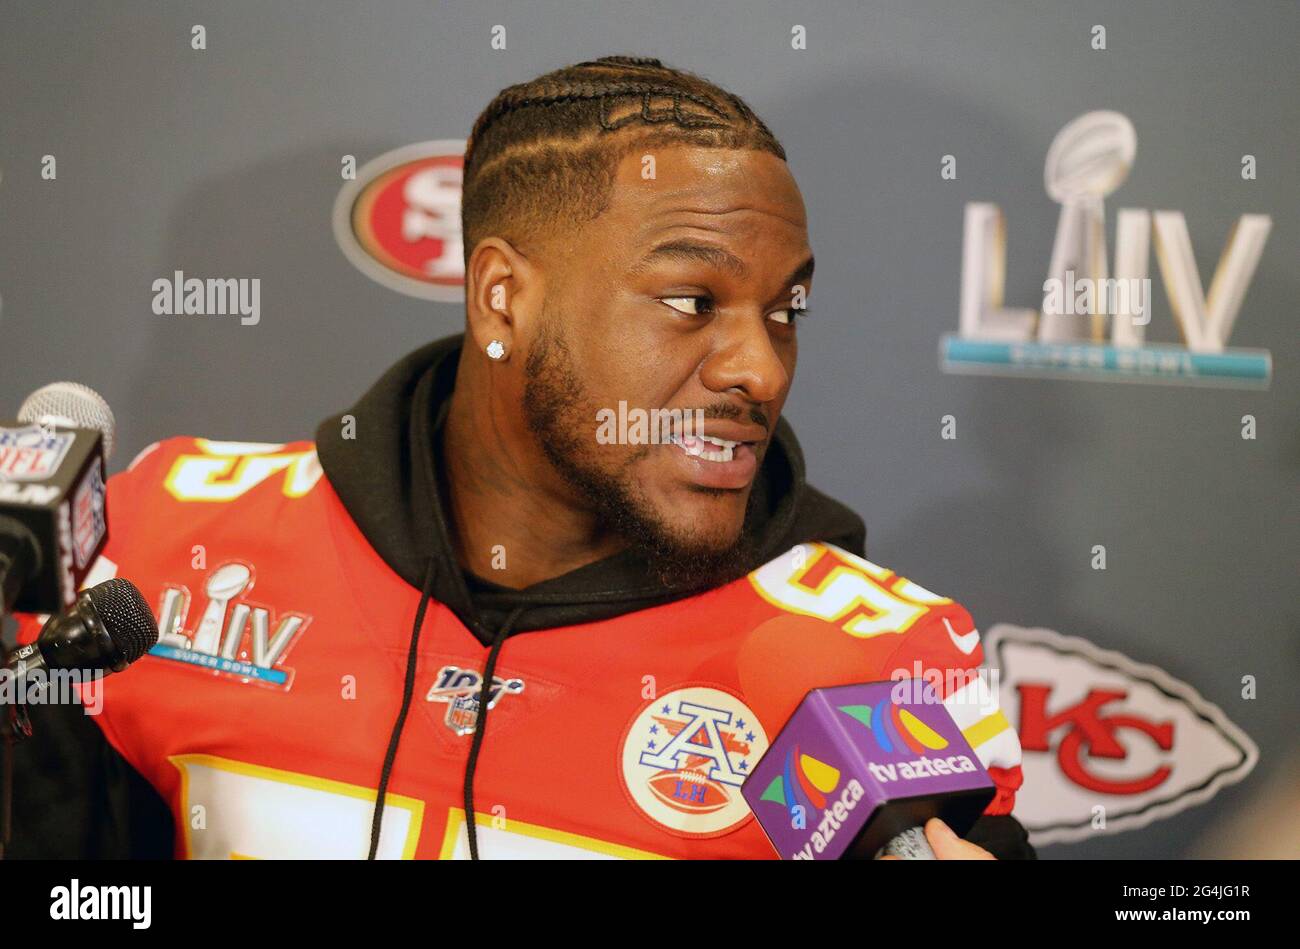 Aventura, USA. 28th Jan, 2020. Kansas City Chiefs defensive end Frank Clark is interviewed by the media as the Chiefs prepare to play the San Francisco 49ers in Super Bowl LIV, on Jan. 28, 2020 Aventura, Fla. (Photo by Charles Trainor Jr./Miami Herald/TNS/Sipa USA) Credit: Sipa USA/Alamy Live News Stock Photo